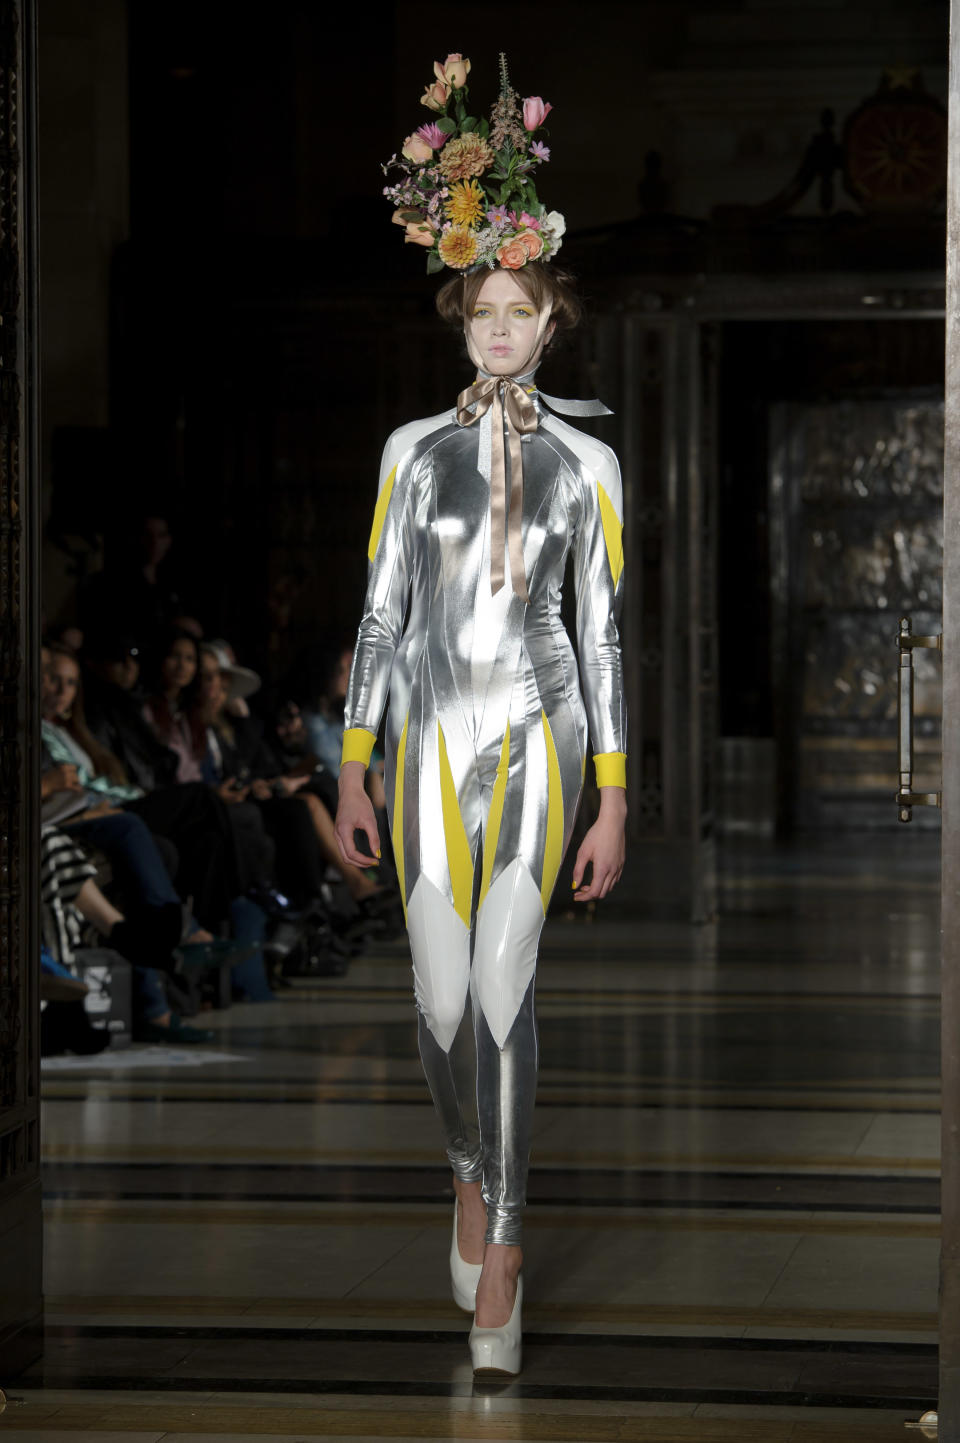 A model wears a design created by Pam Hogg during London Fashion Week Spring/Summer 2014, at the Freemasons' Hall in central London, Monday, Sept. 16, 2013. (Photo by Jonathan Short/Invision/AP)